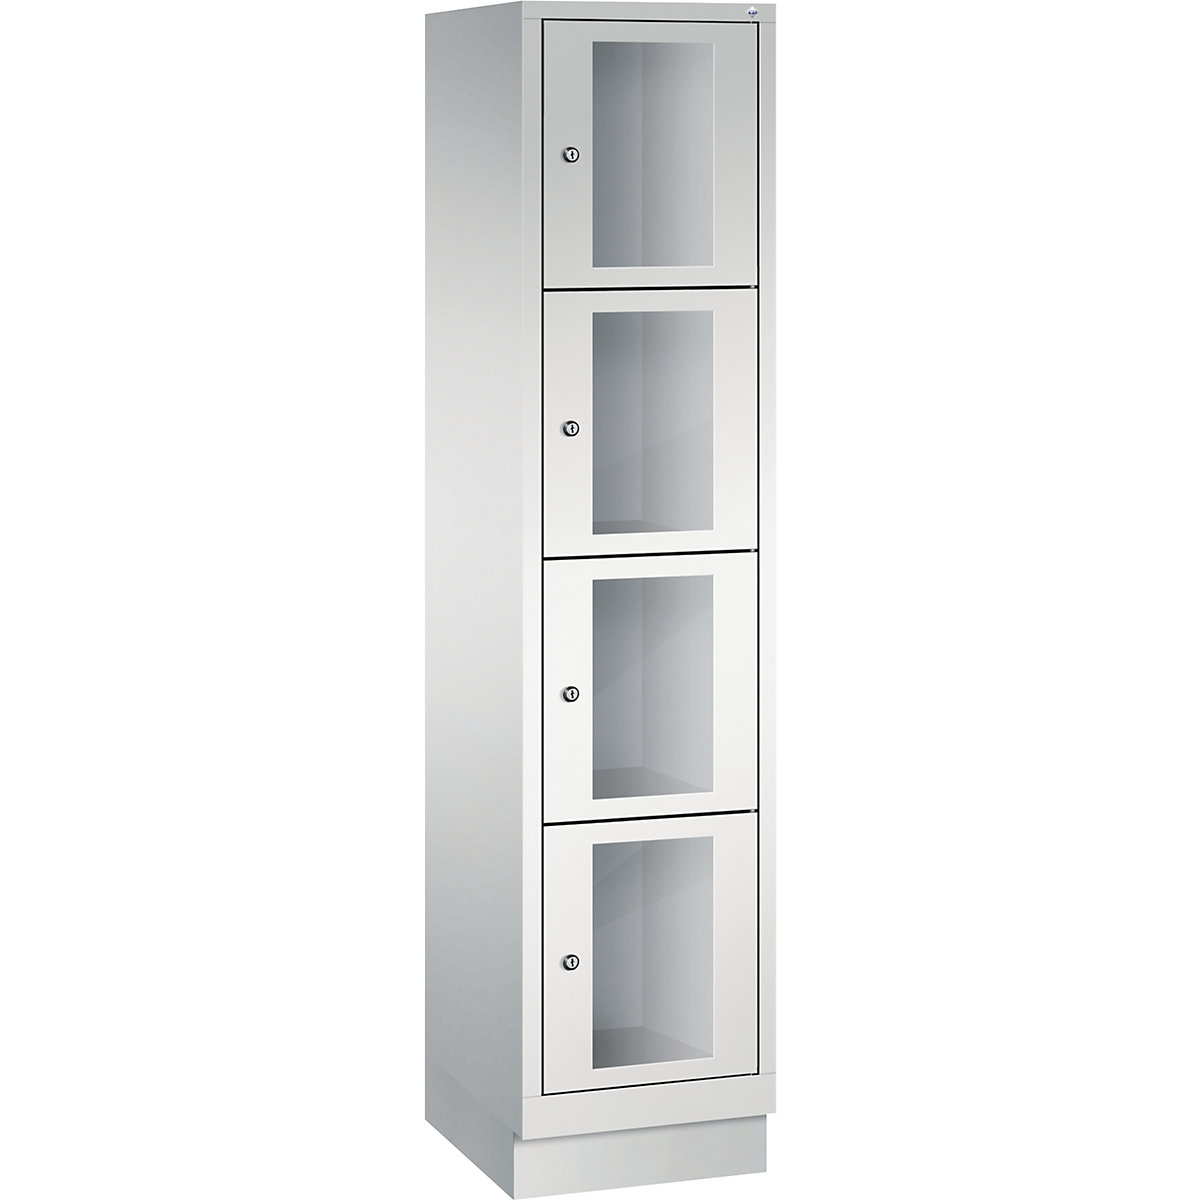 CLASSIC locker unit, compartment height 375 mm, with plinth - C+P